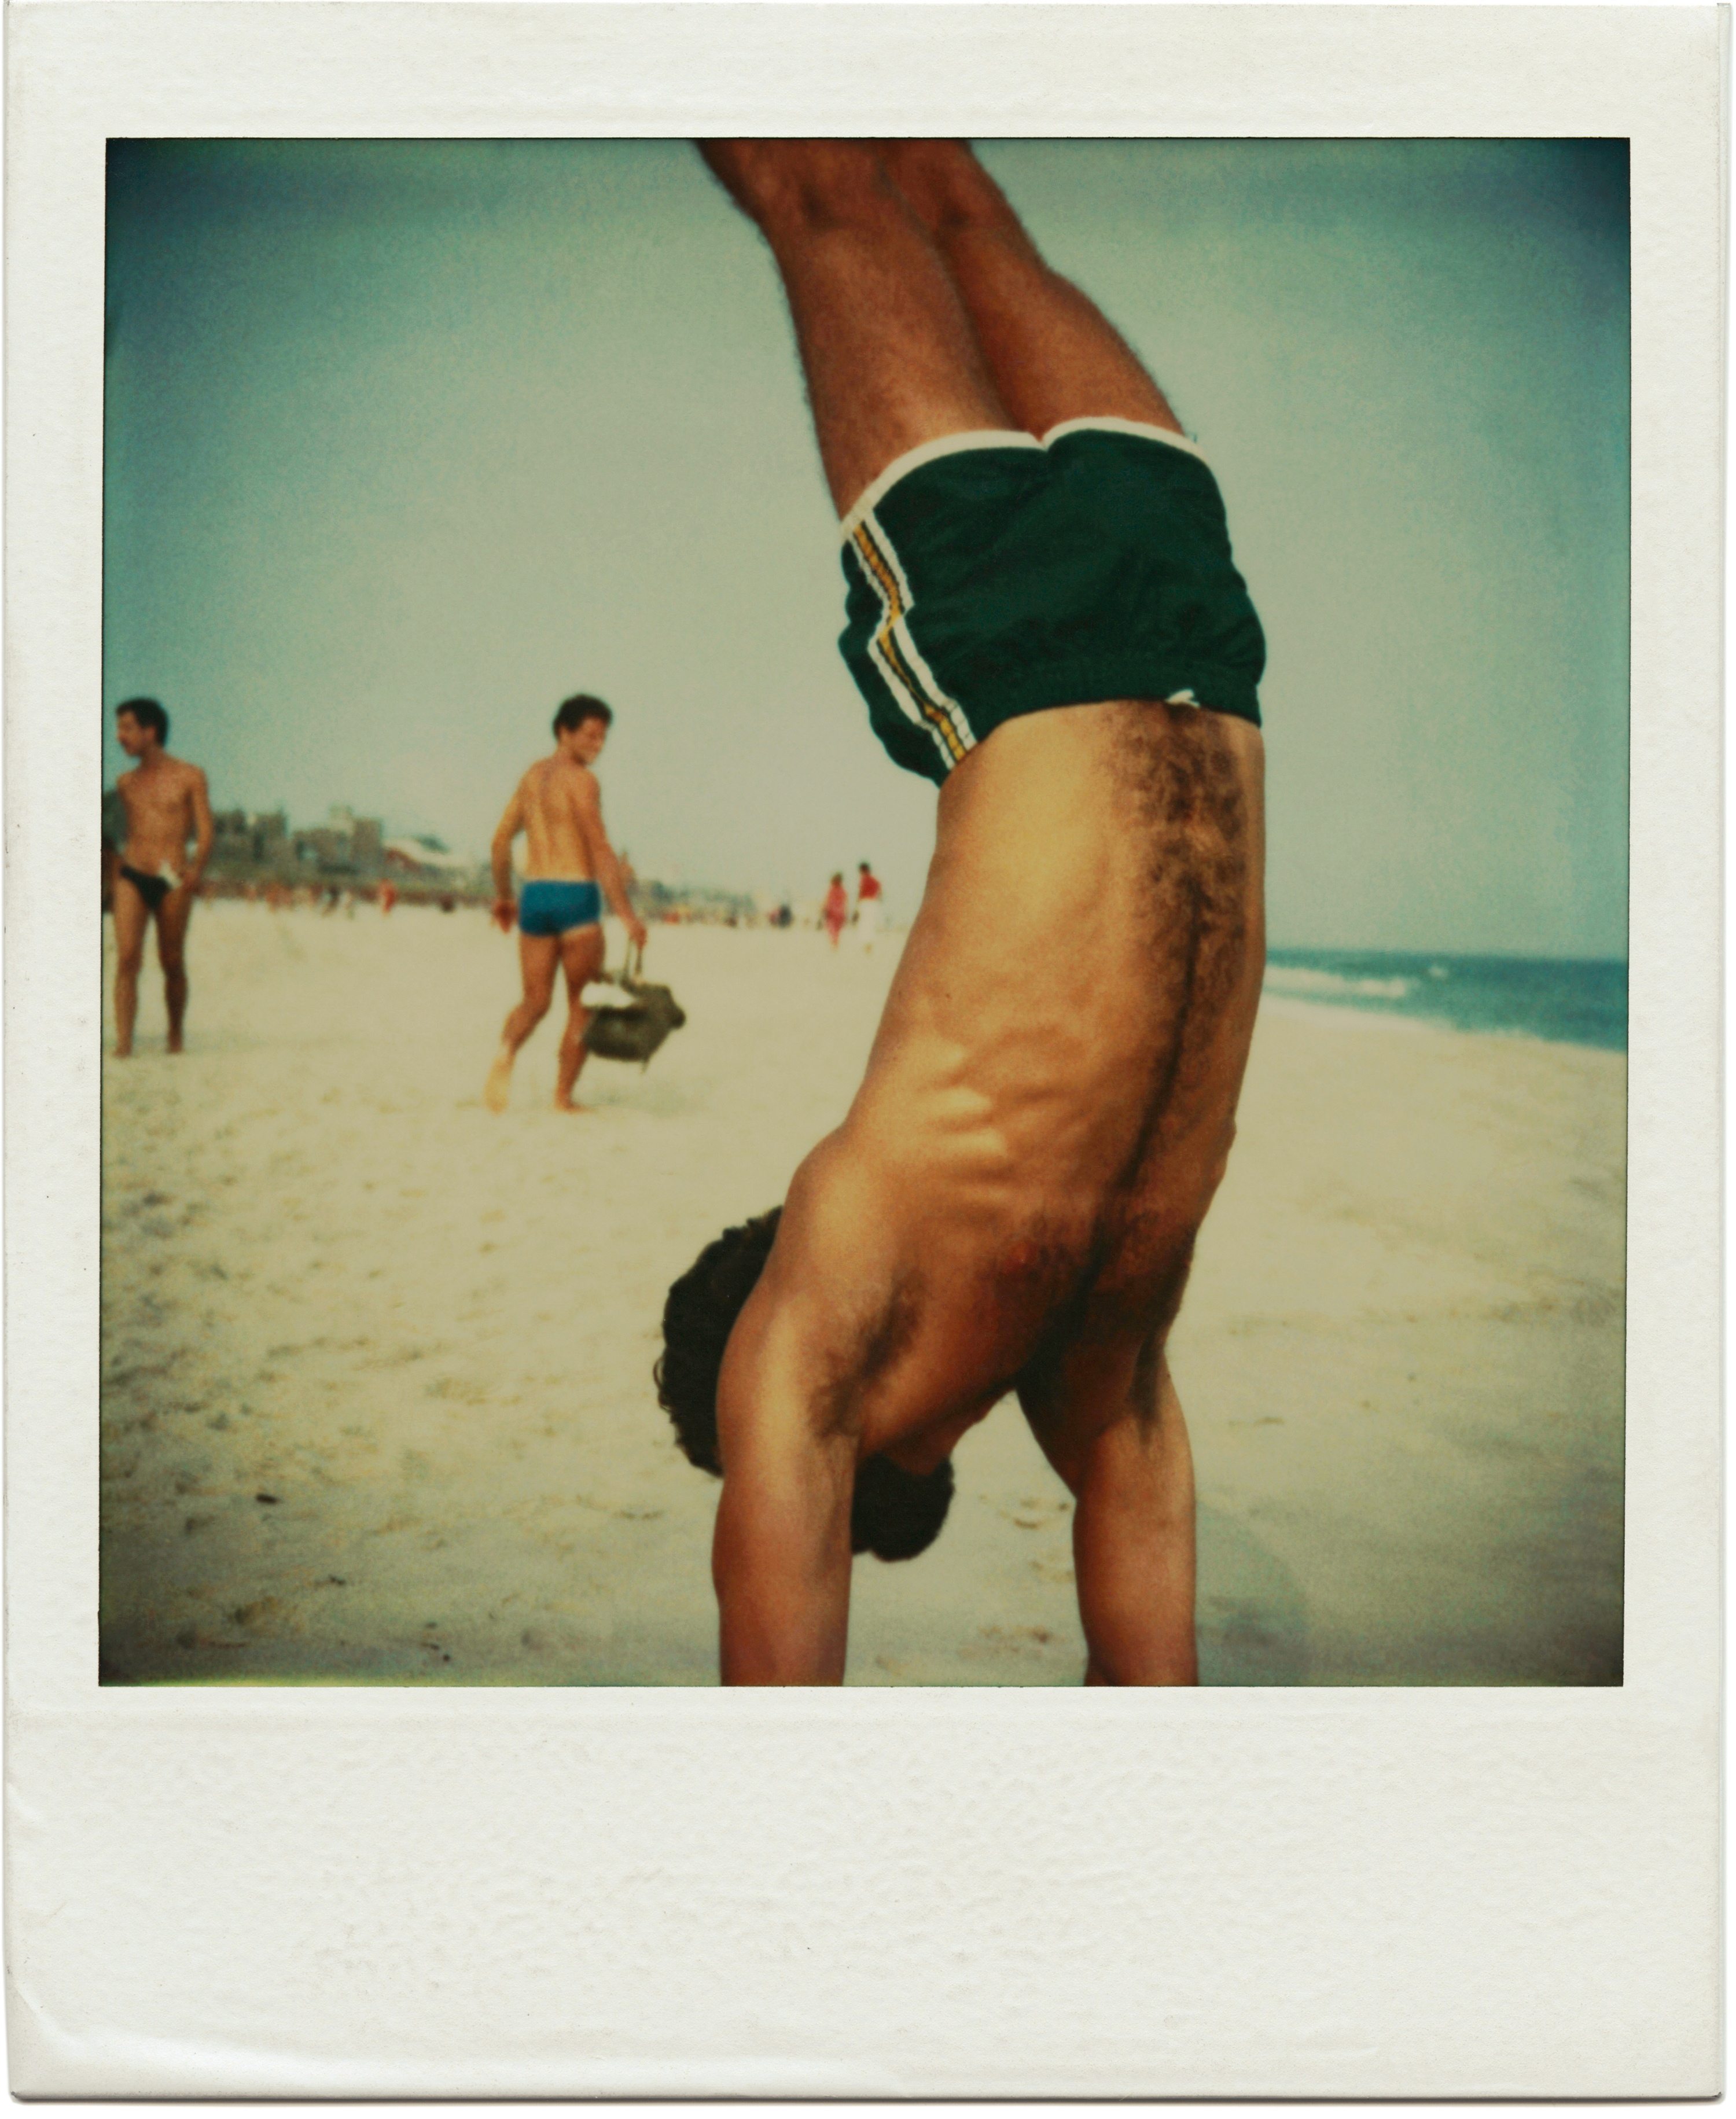 Untitled, 368
                              from the series Fire Island Pines, Polaroids 1975-1983.
                              
                               As a figurative photographer, [the beach] is one of the most natural places for me to make my art. [This photo] expresses the reason why we all love to come to the beach to play.”